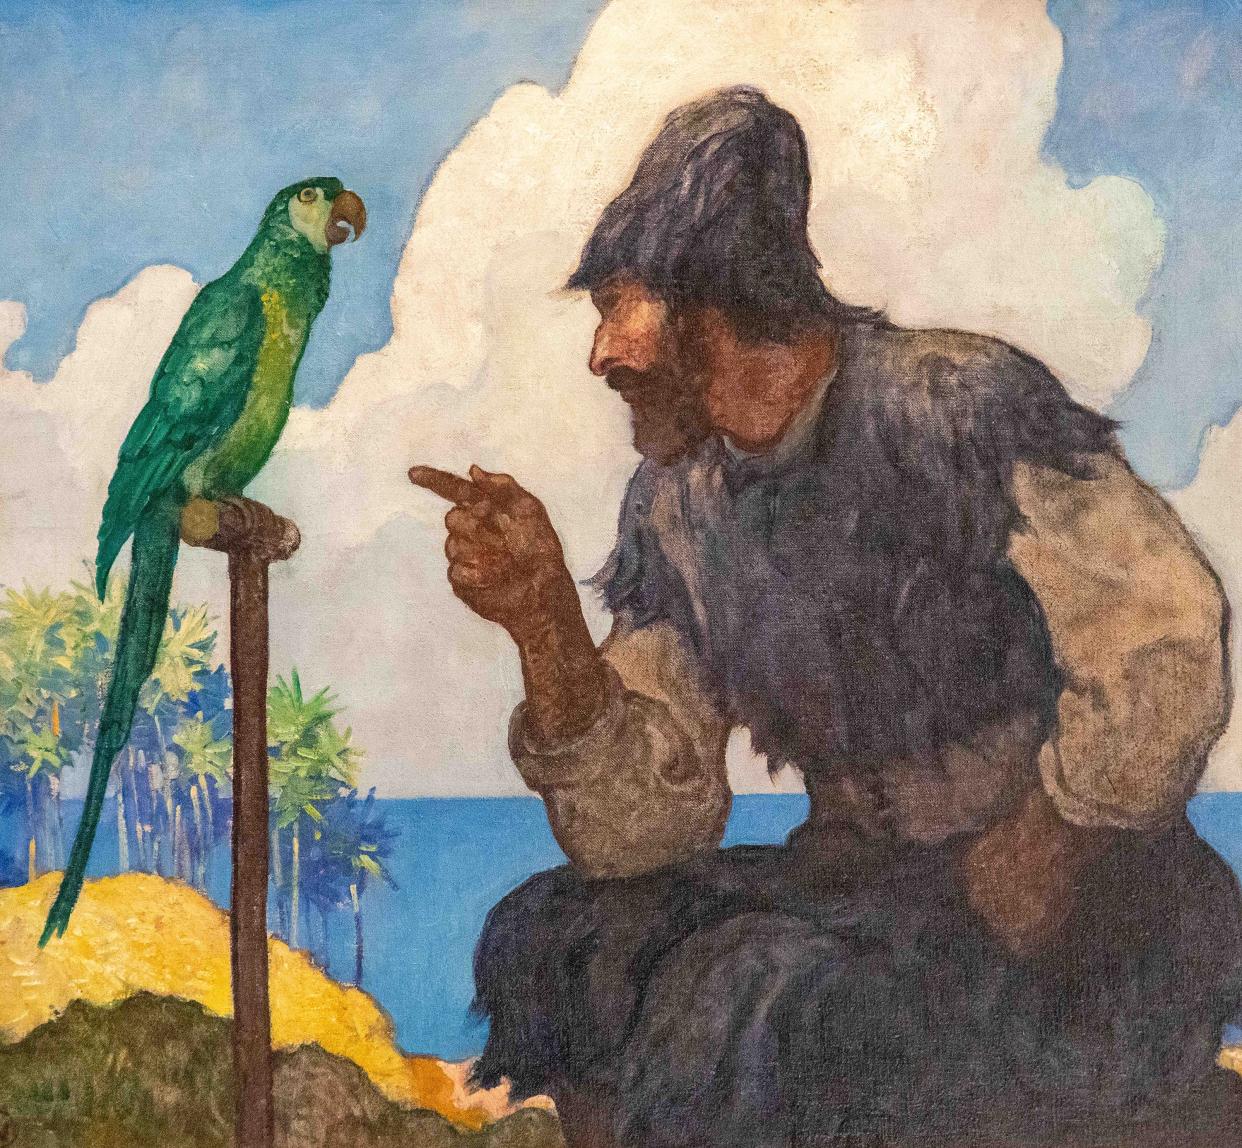 "Robinson Crusoe," cover illustration for editions with maroon or black binding, by N.C. Wyeth